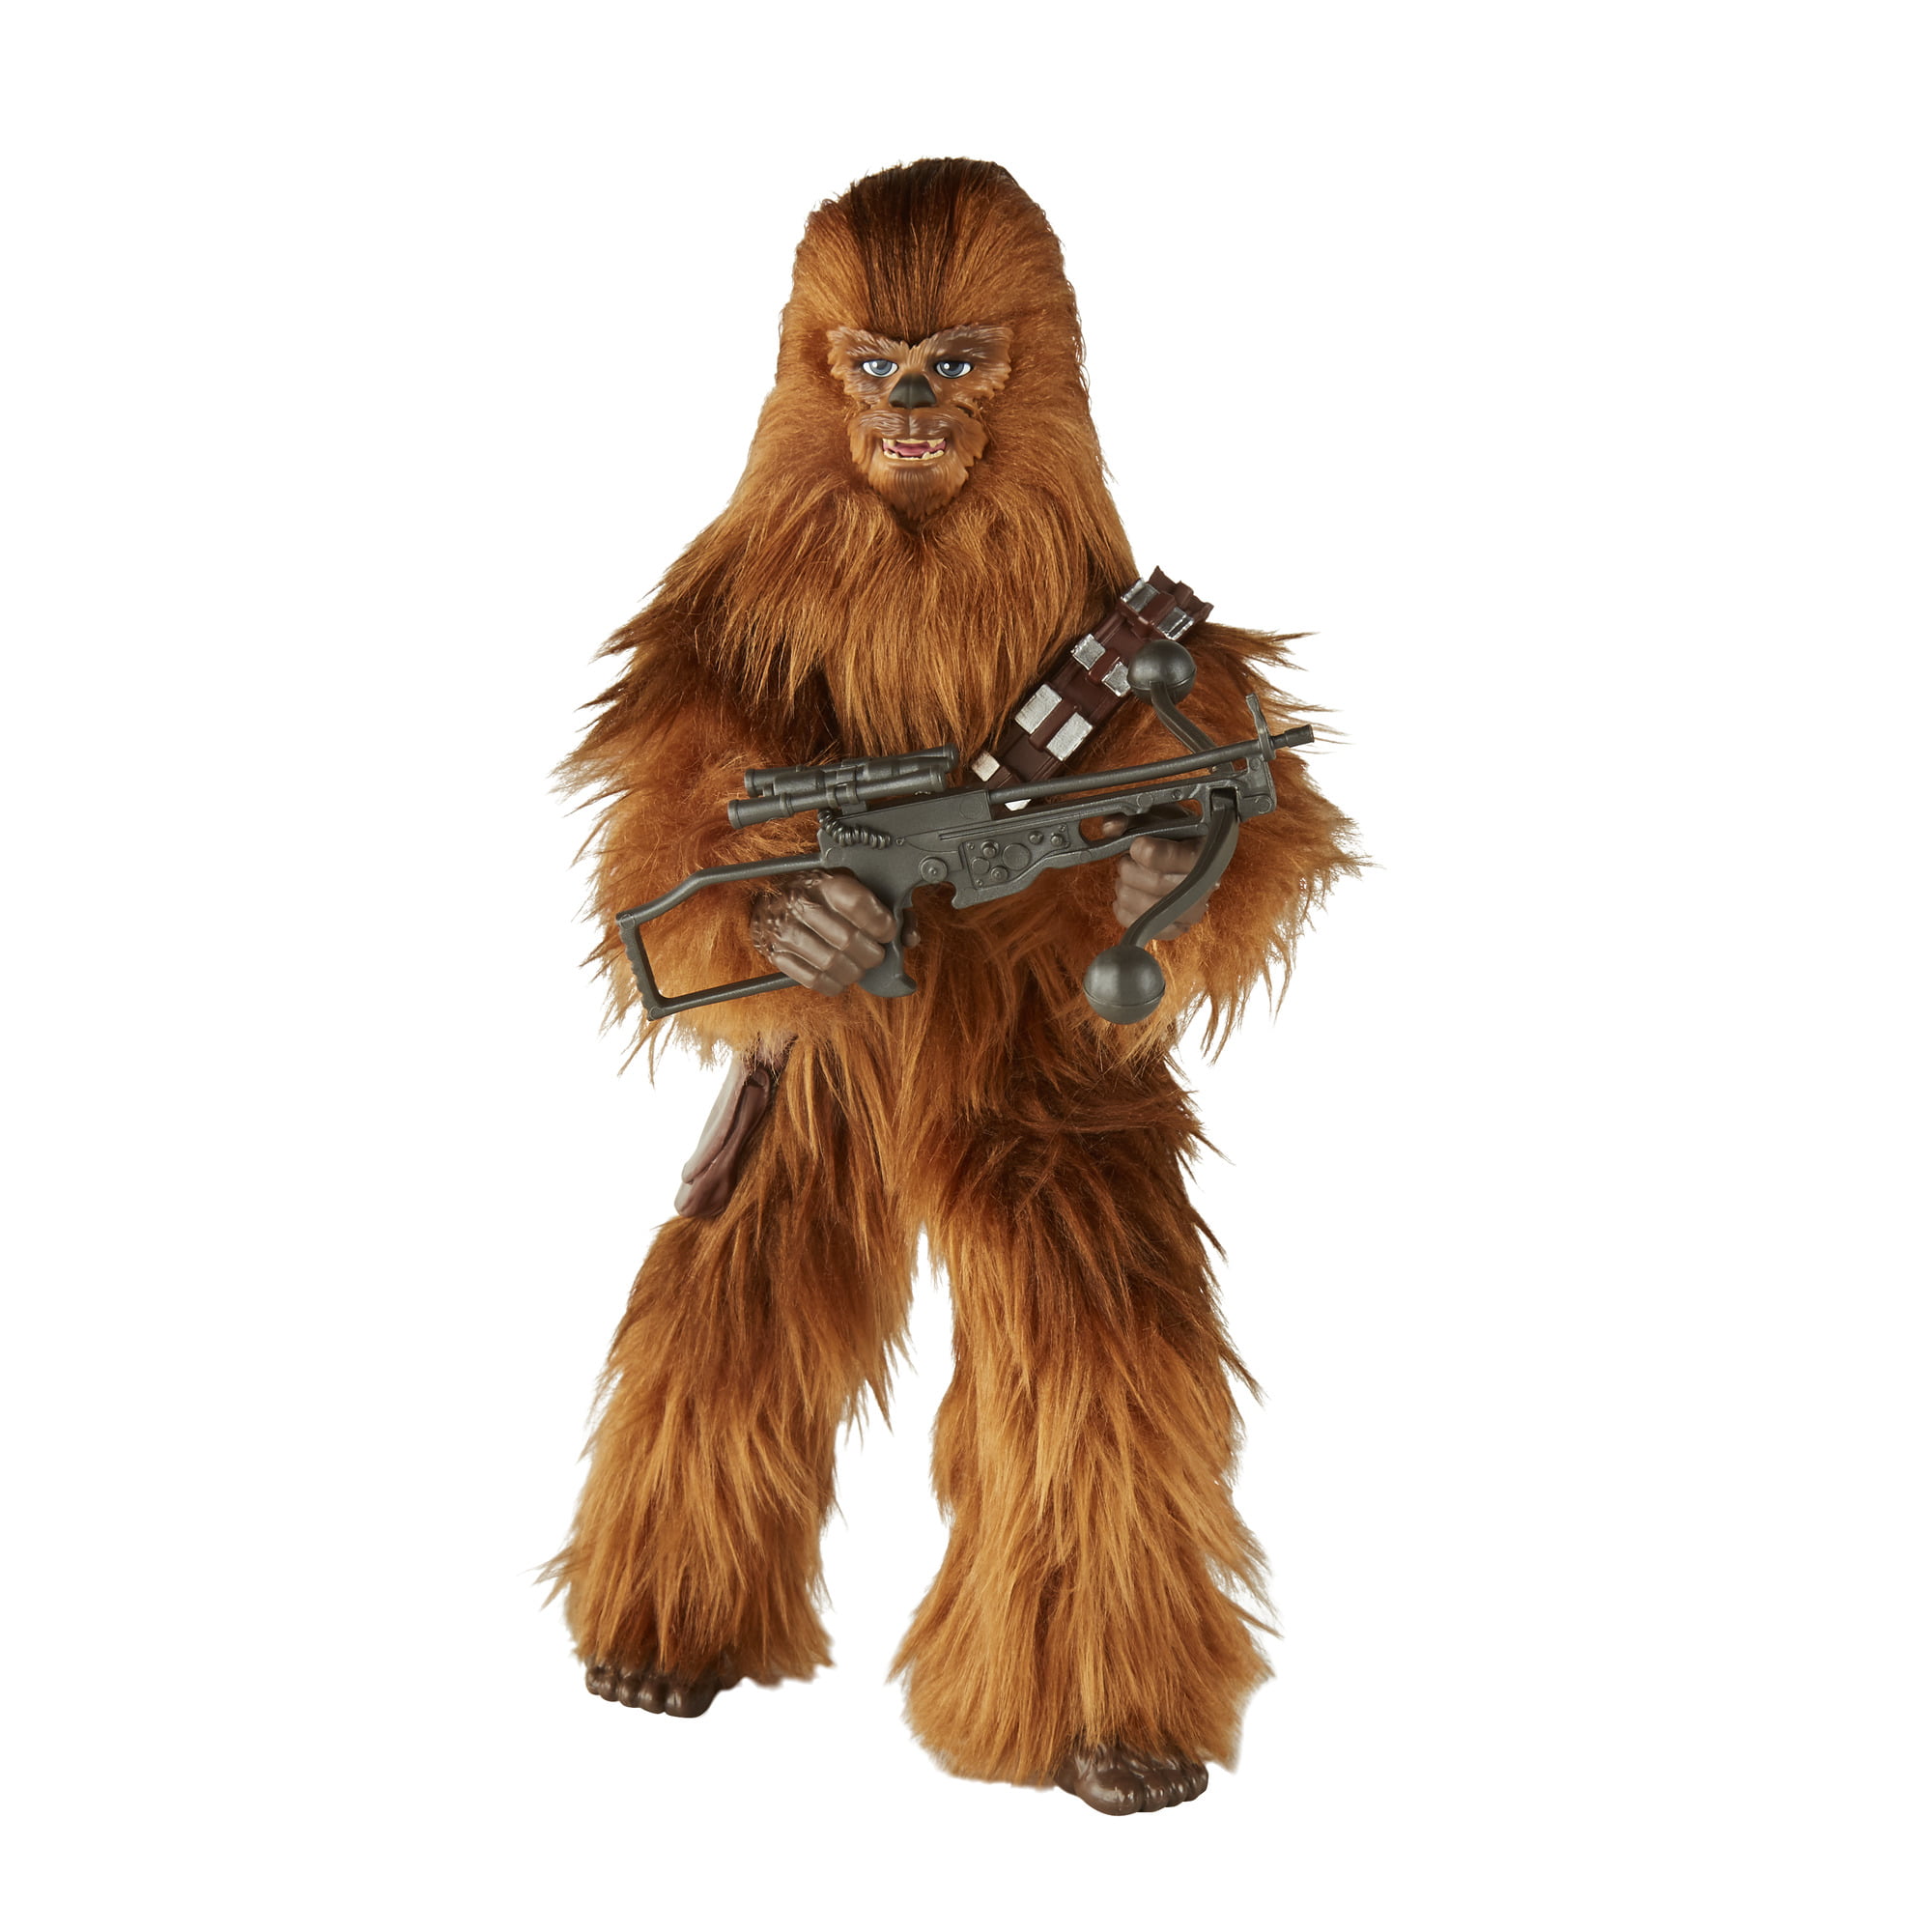 Star Wars Forces of Destiny 11” ELECTRONIC ROARING CHEWBACCA FIGURE  Doll Hasbro 